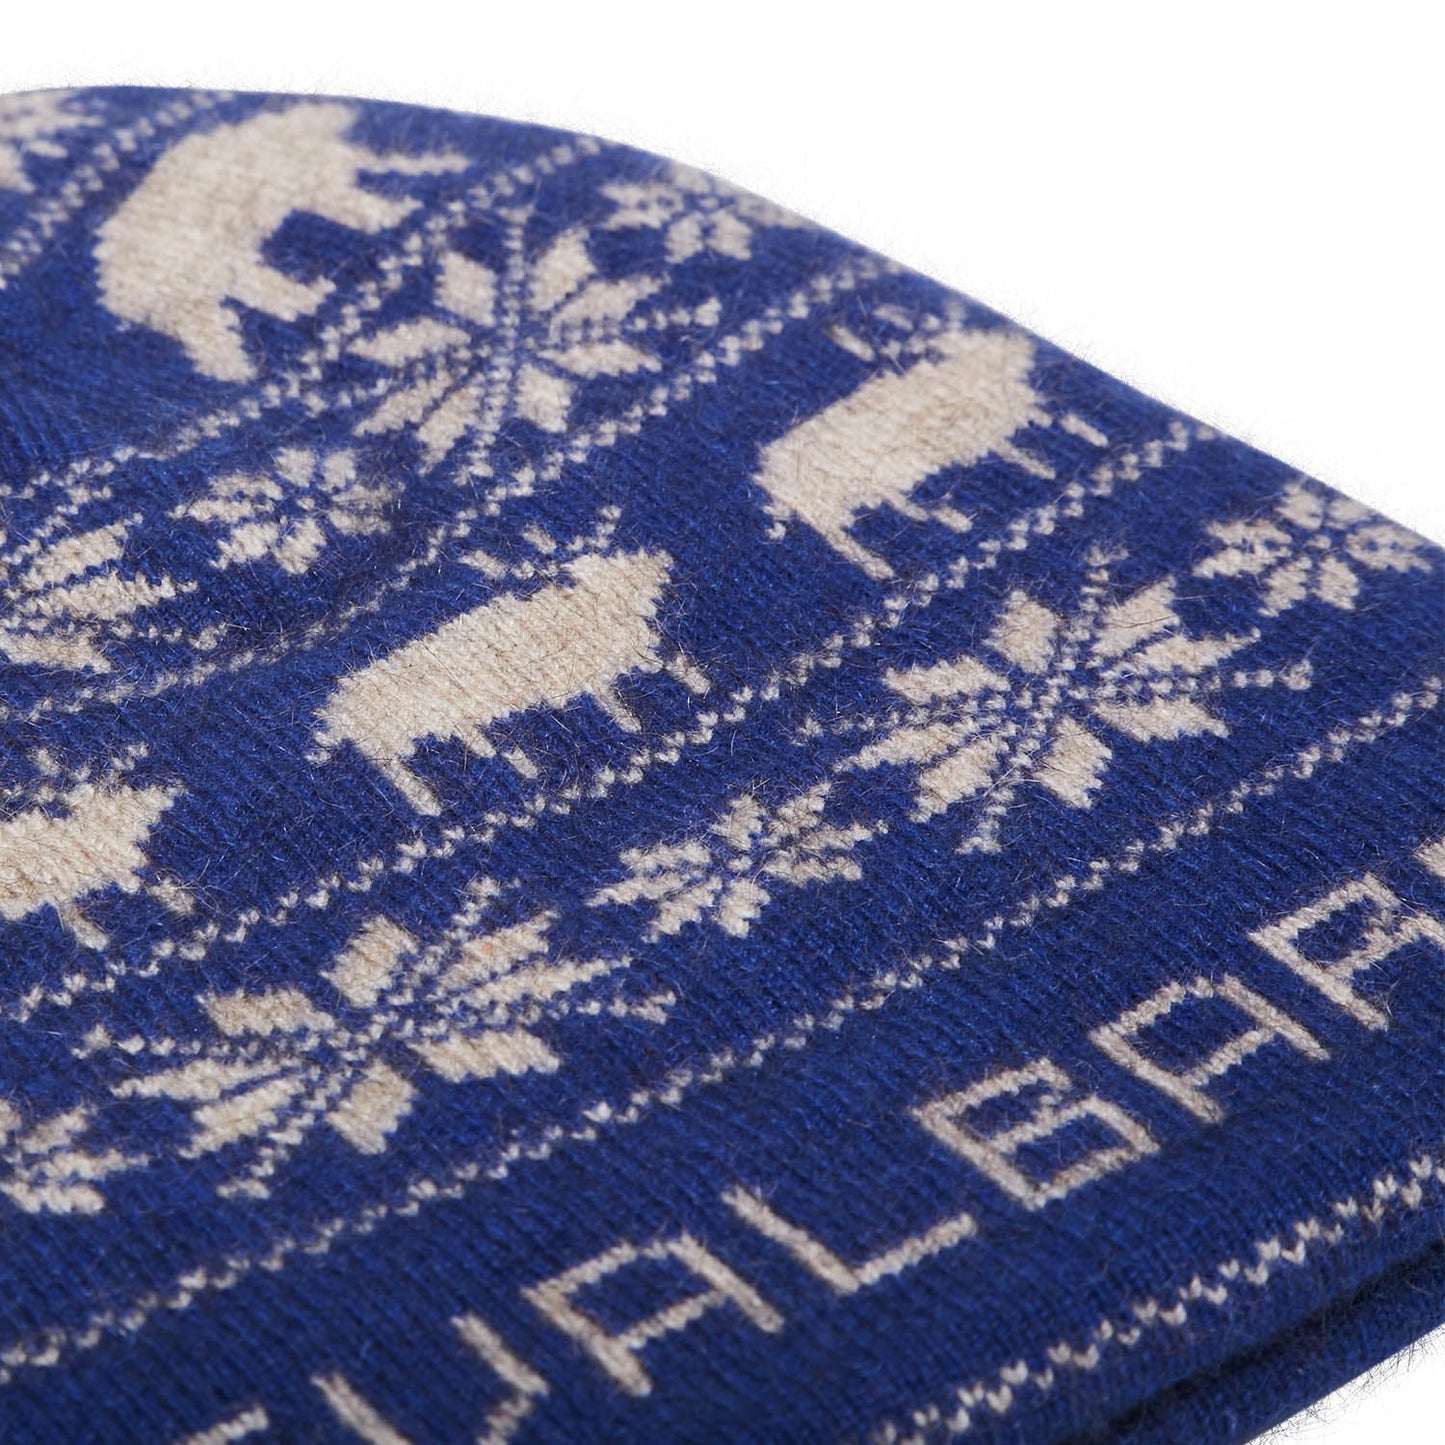 Svalbard Expedition Beanie (Royal Blue)